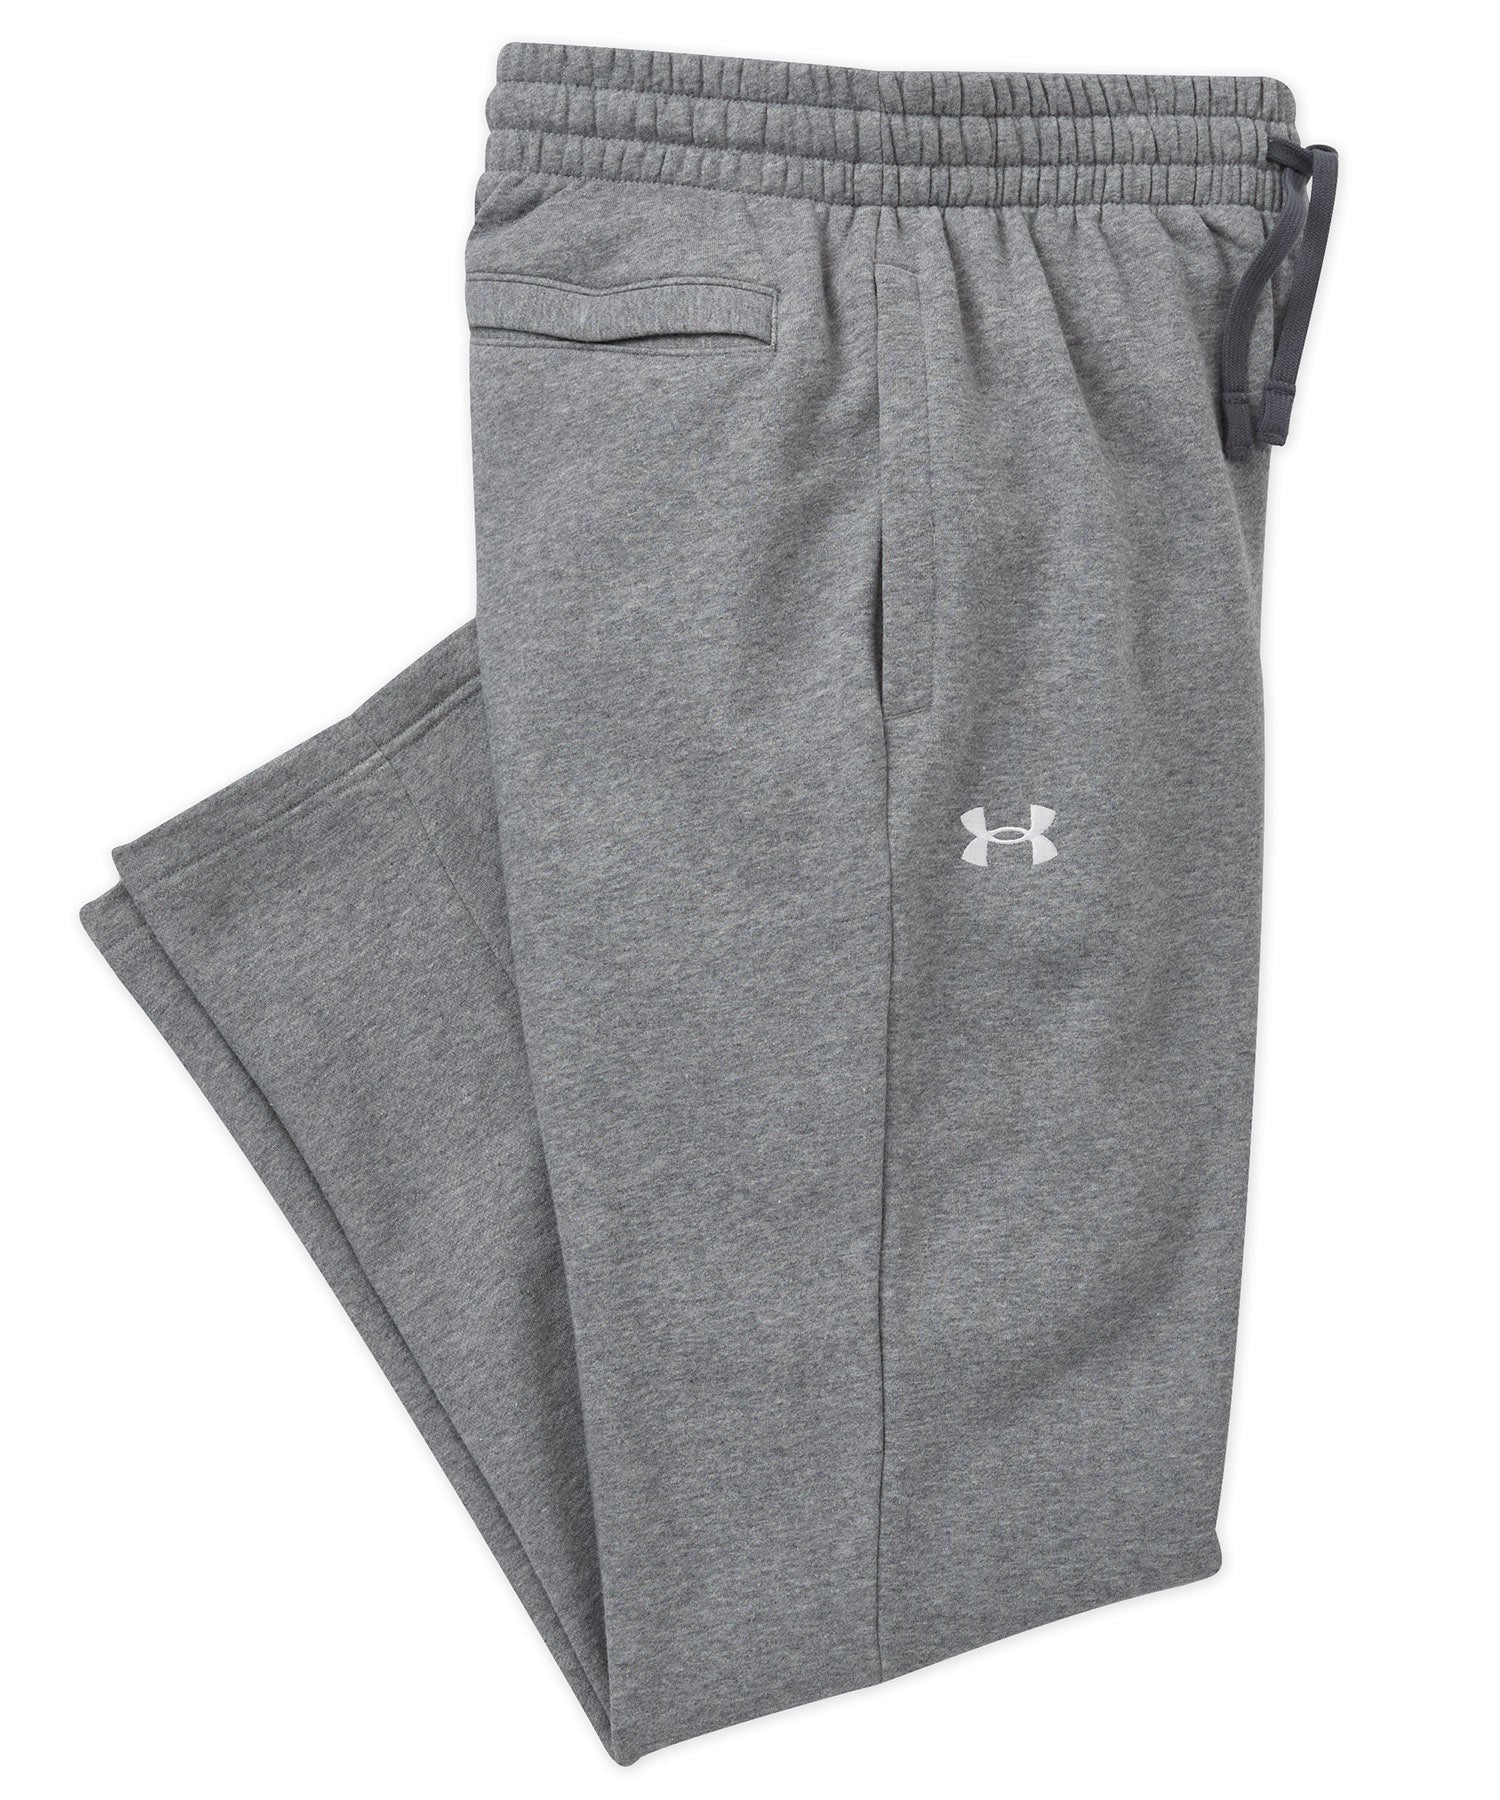 Pantaloni in pile Under Armour Rival, Men's Big & Tall